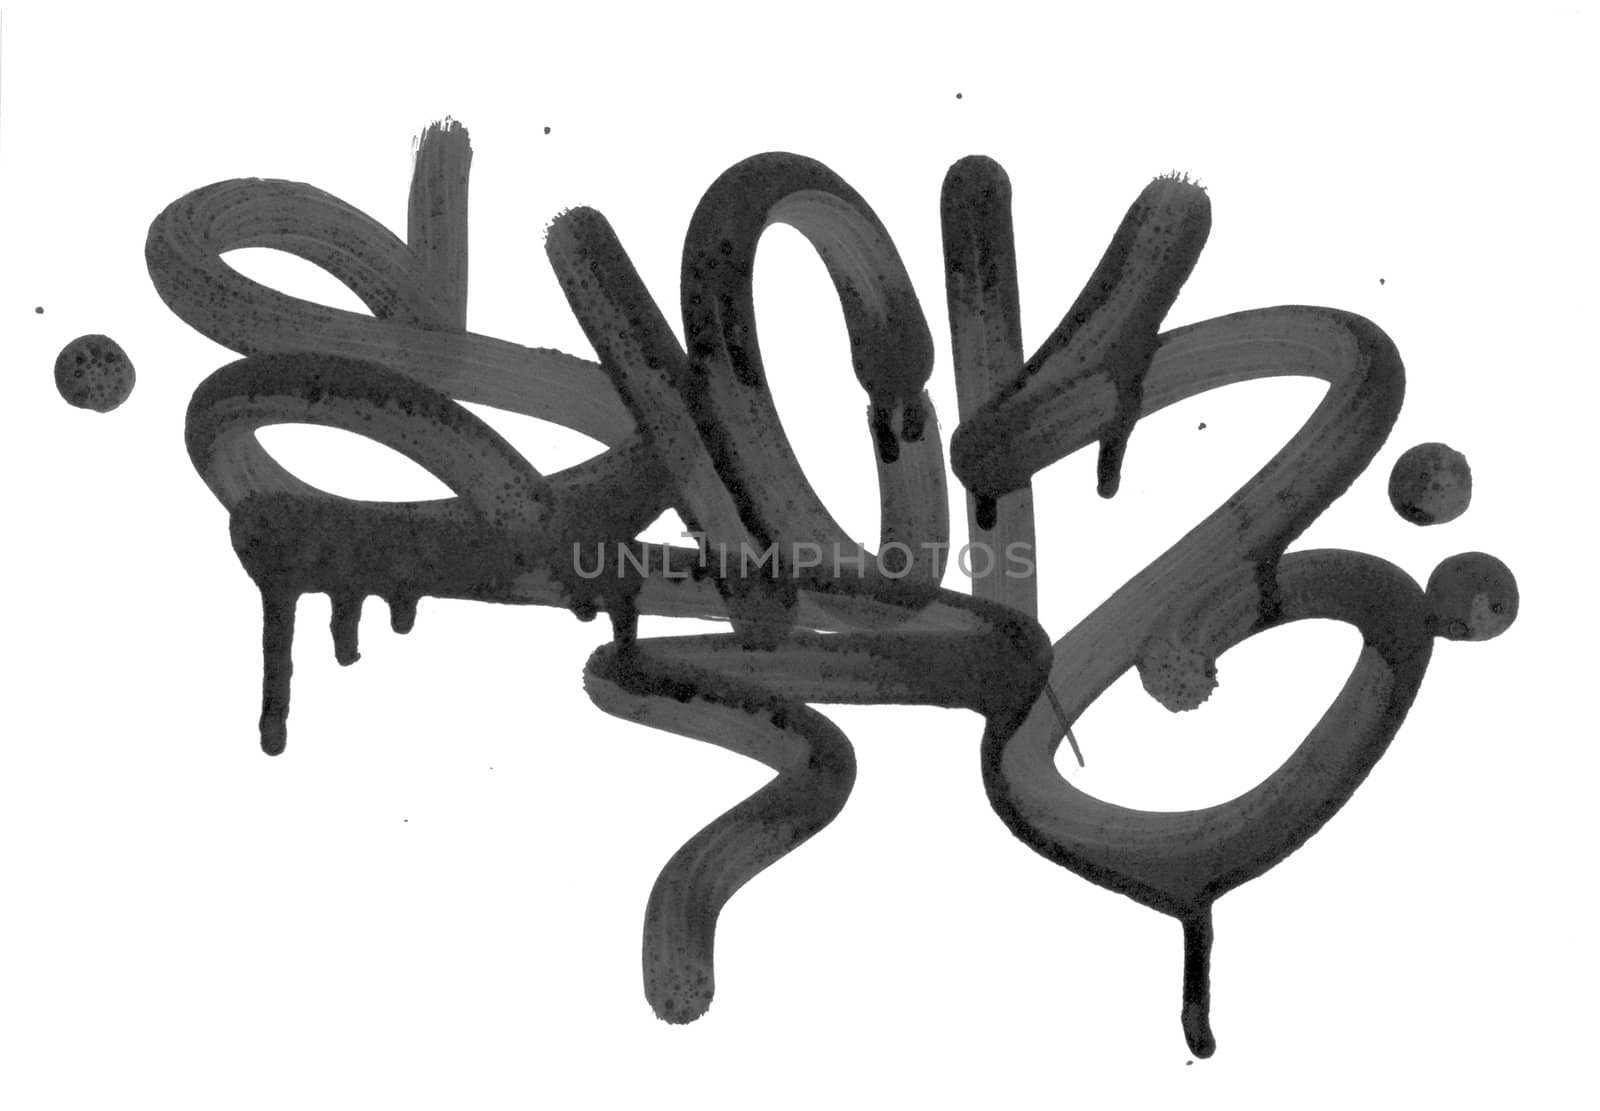 Graffiti tag with drips and grunge. High Resolution with whit background.